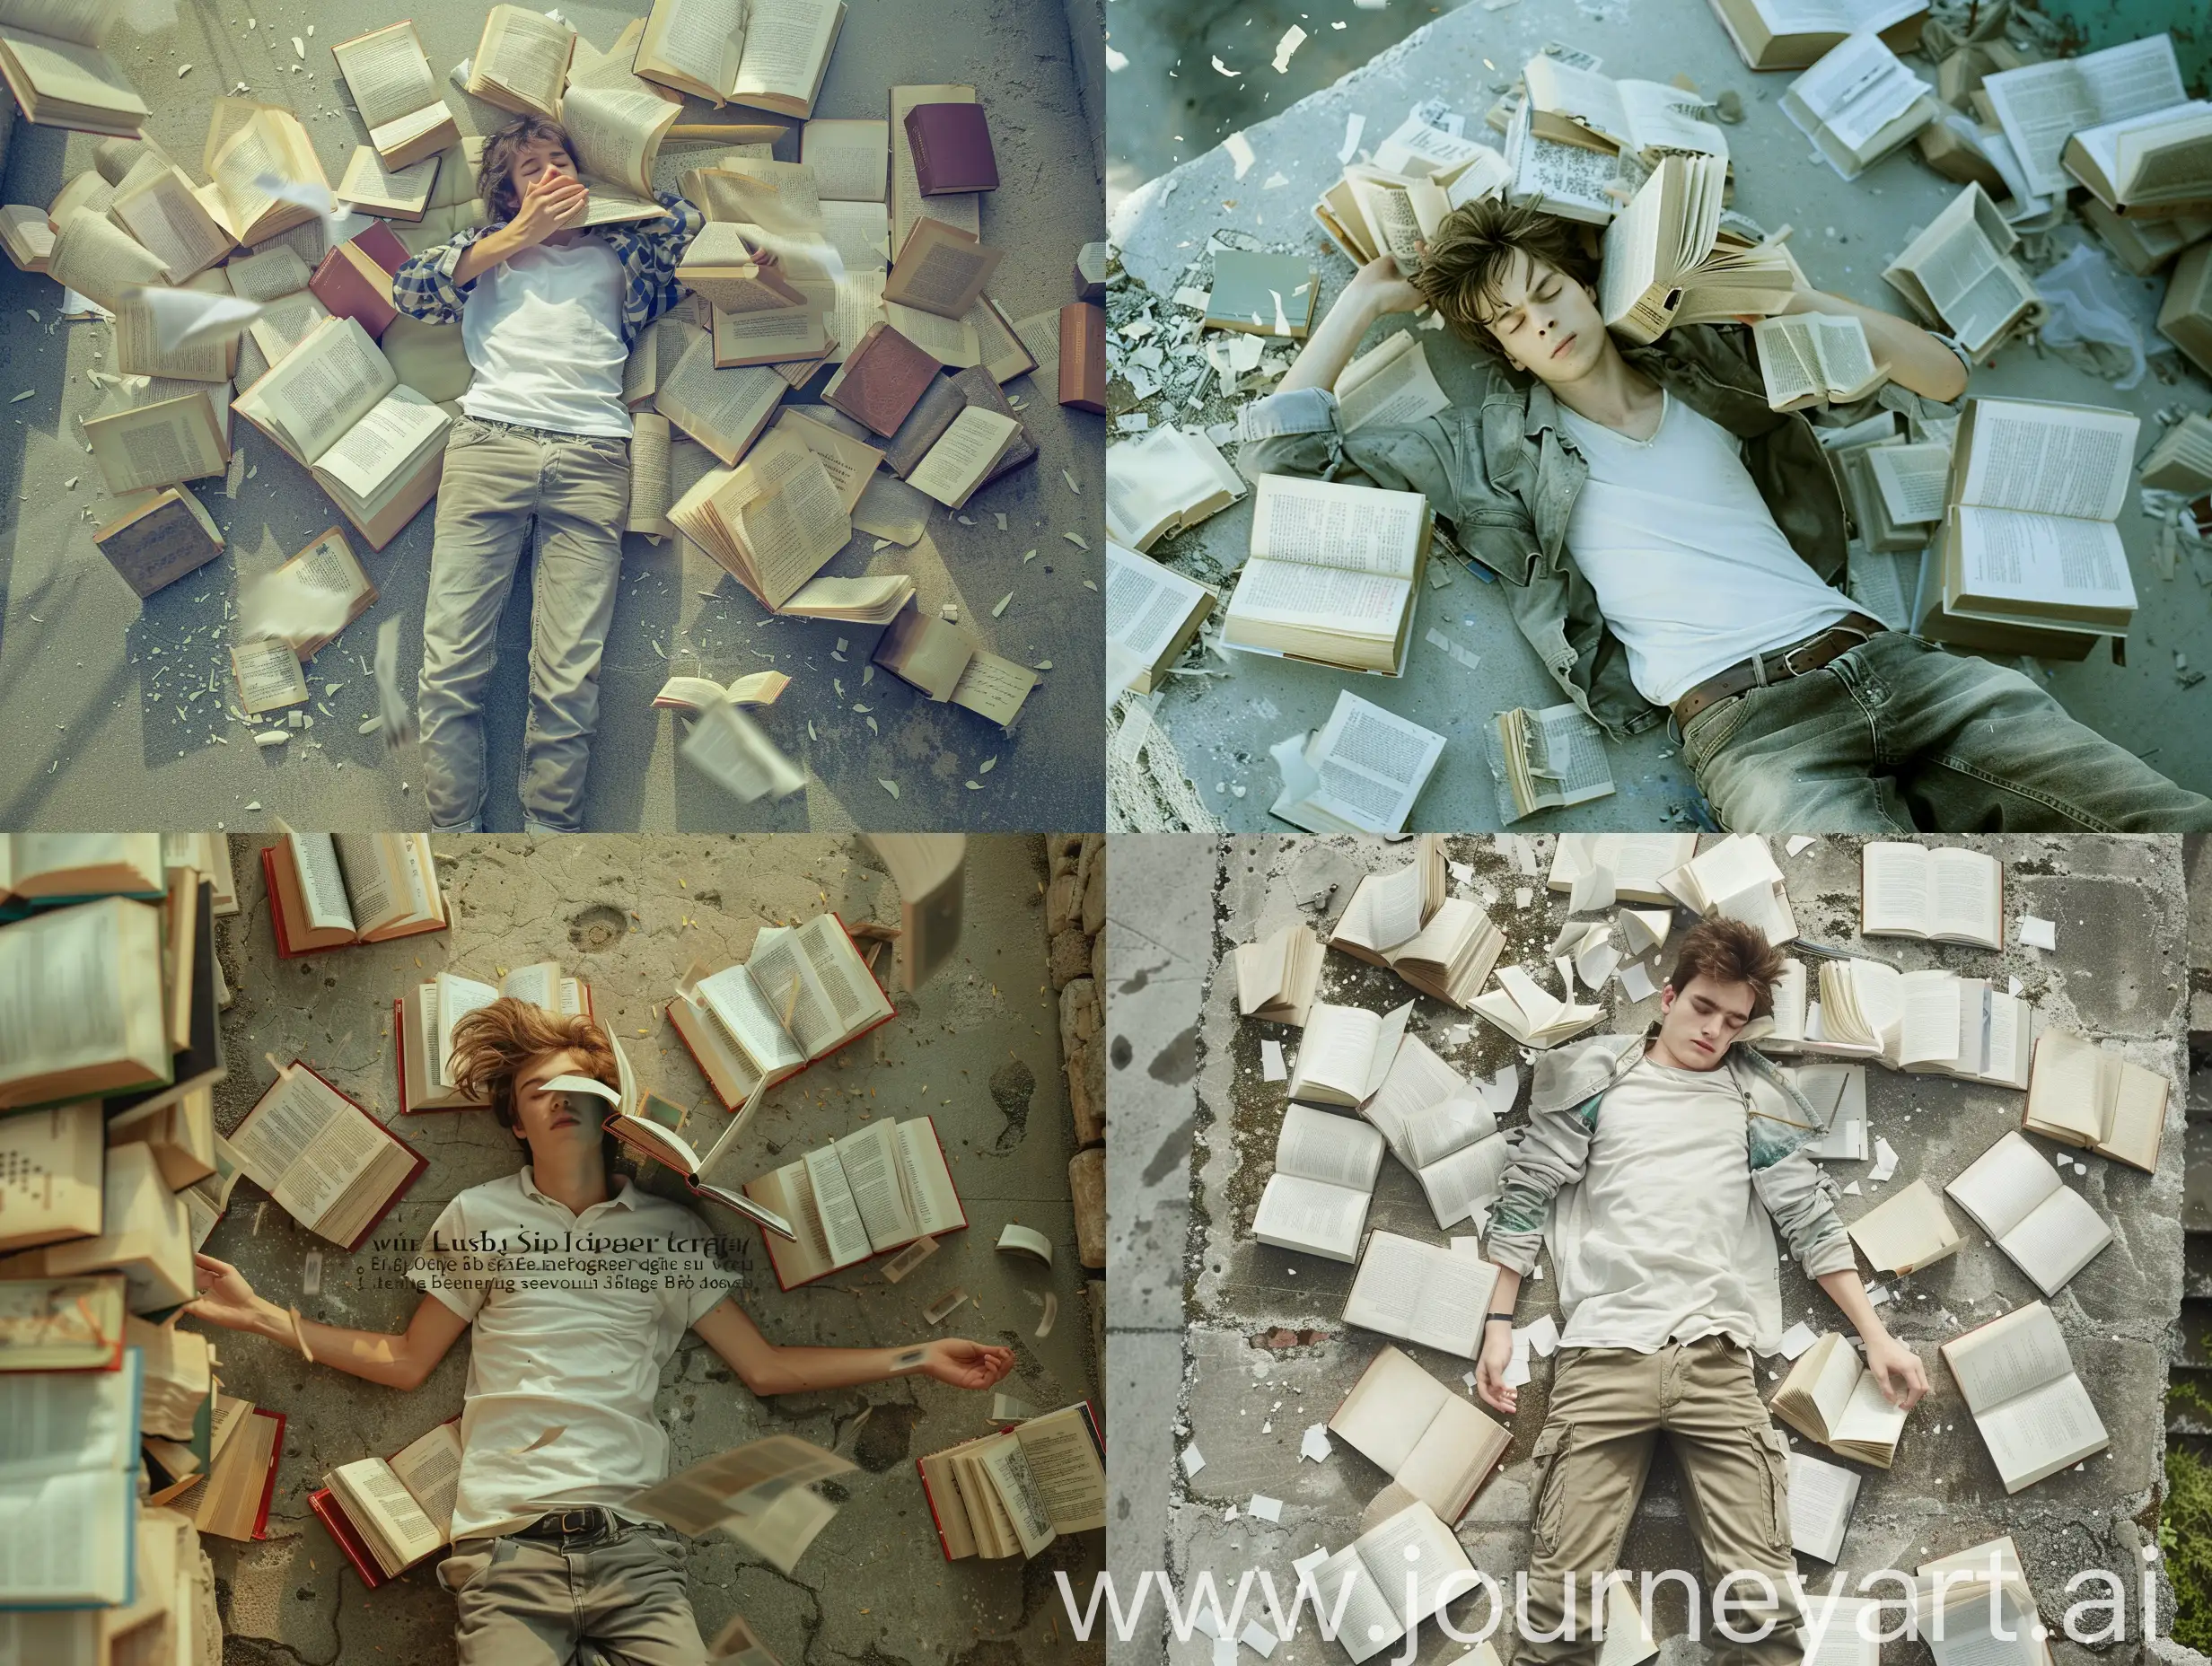 Young-Man-Relaxing-Surrounded-by-Opened-Books-on-Concrete-Surface